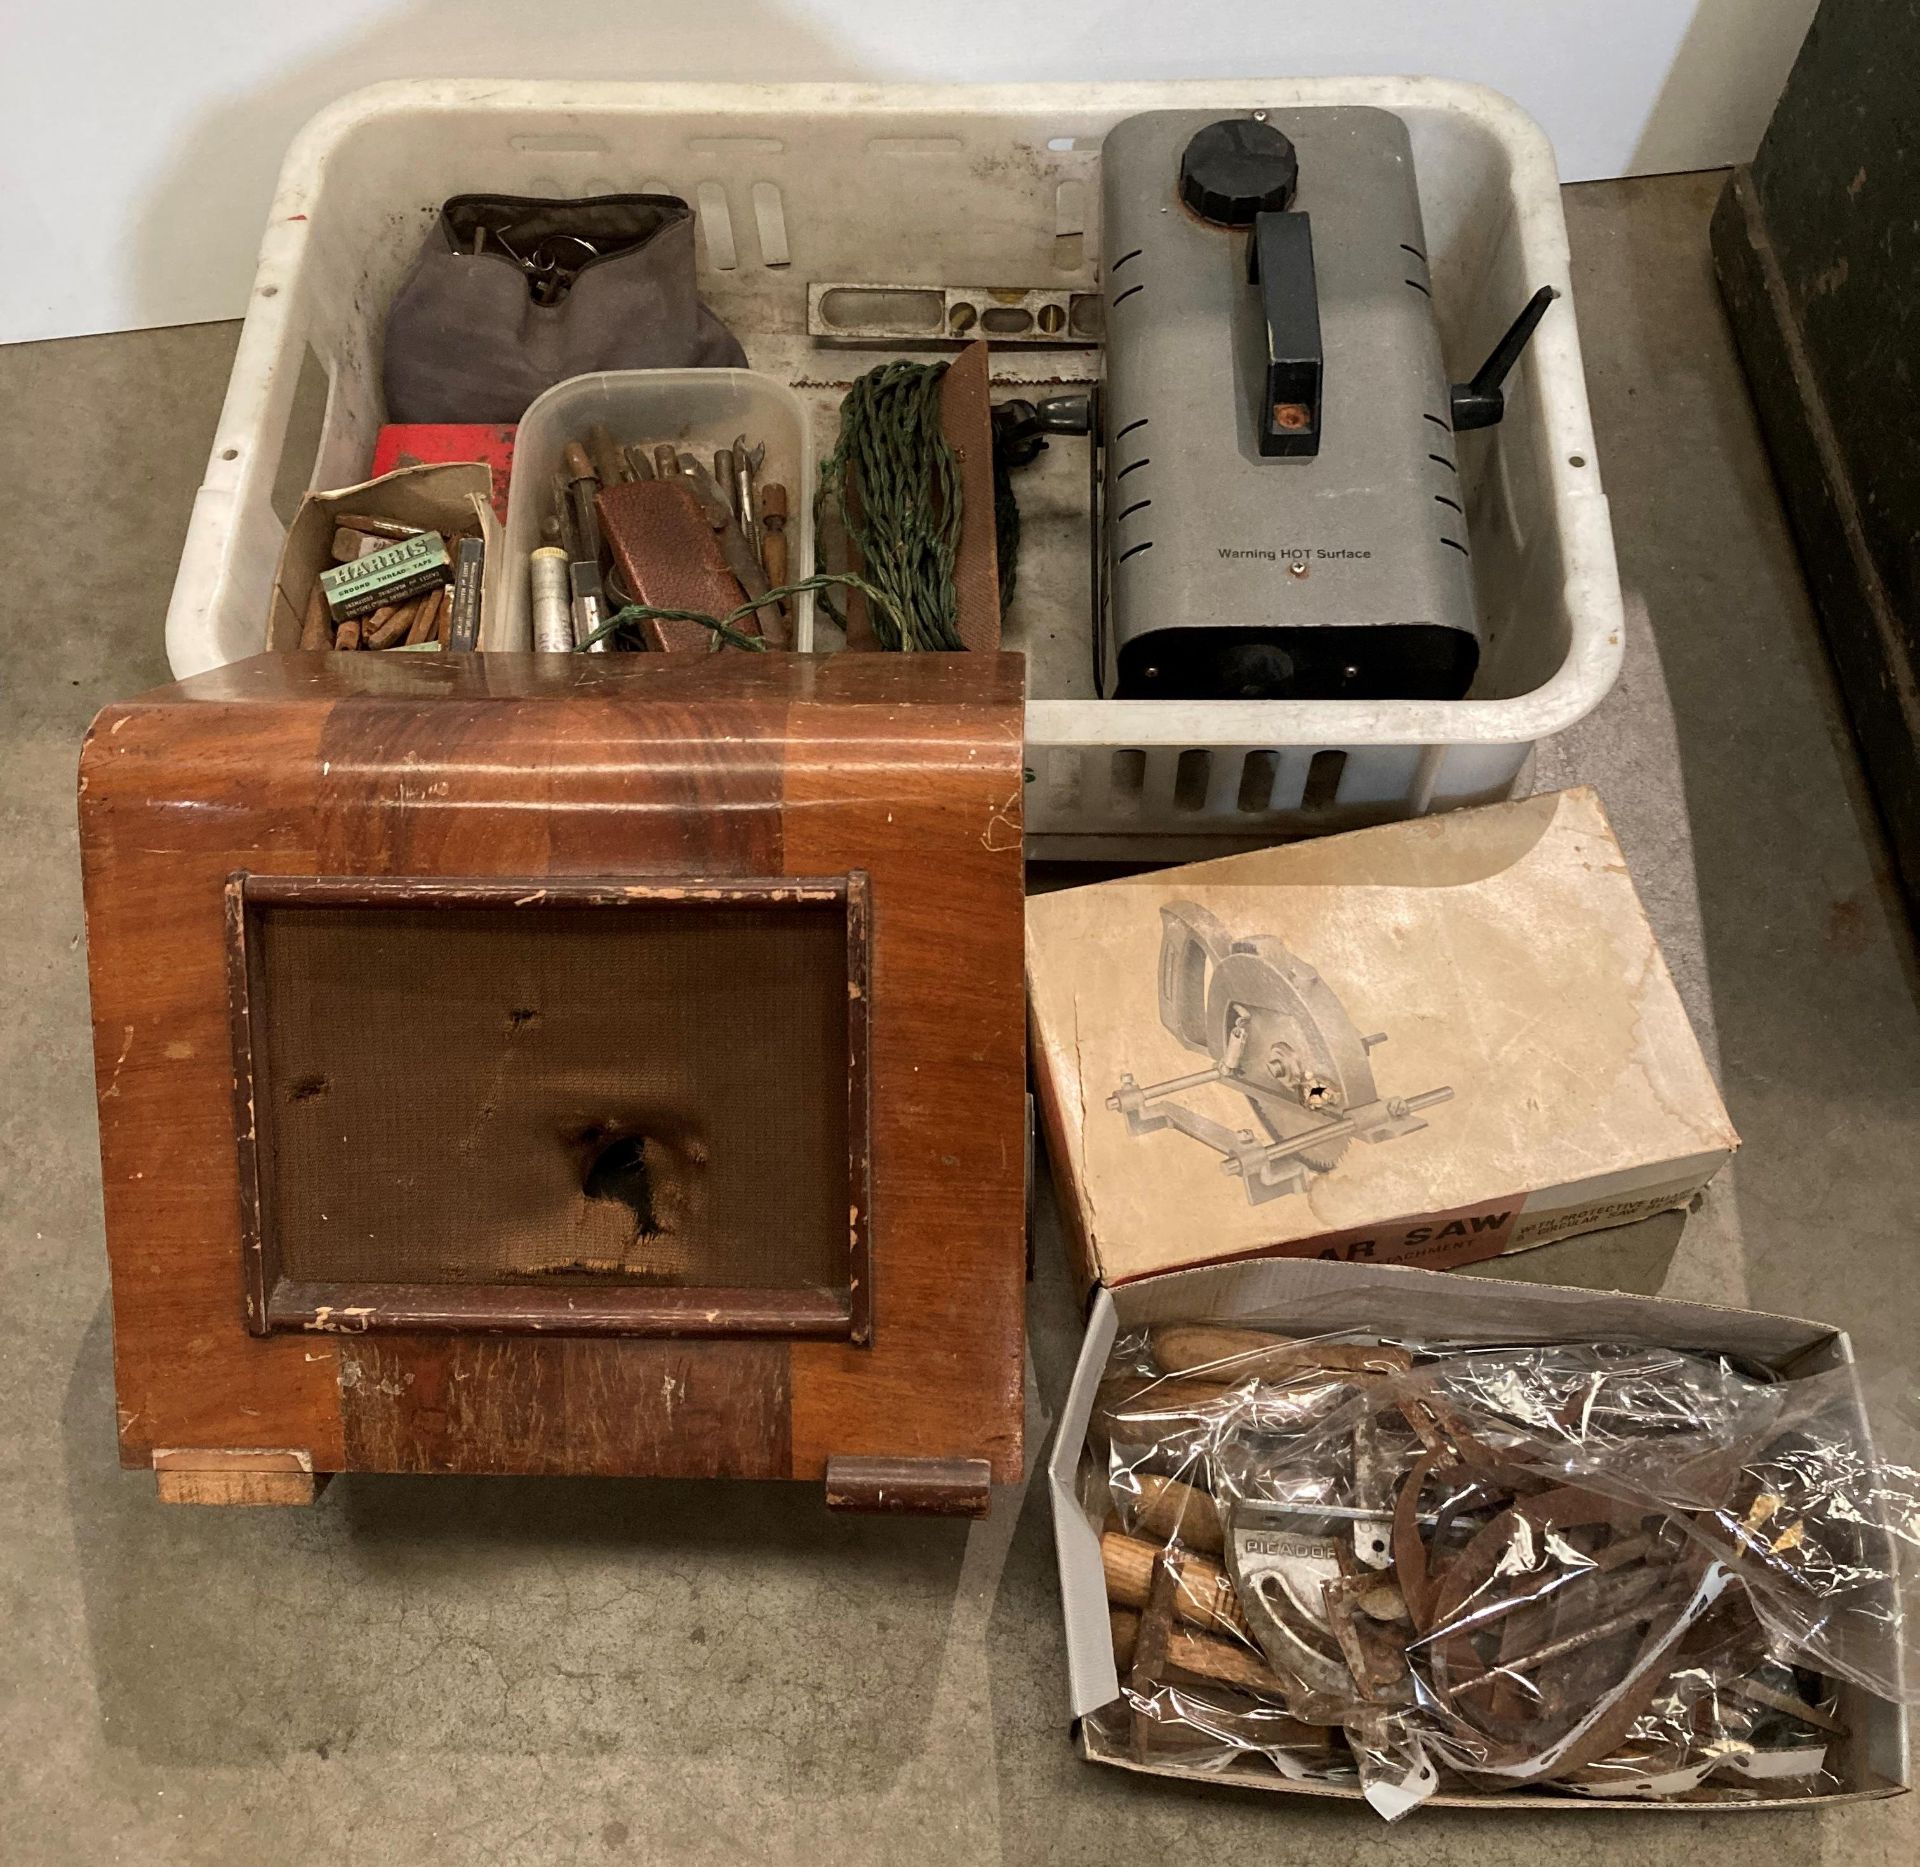 Contents to crate - tap and die sets, measuring equipment, chisels,